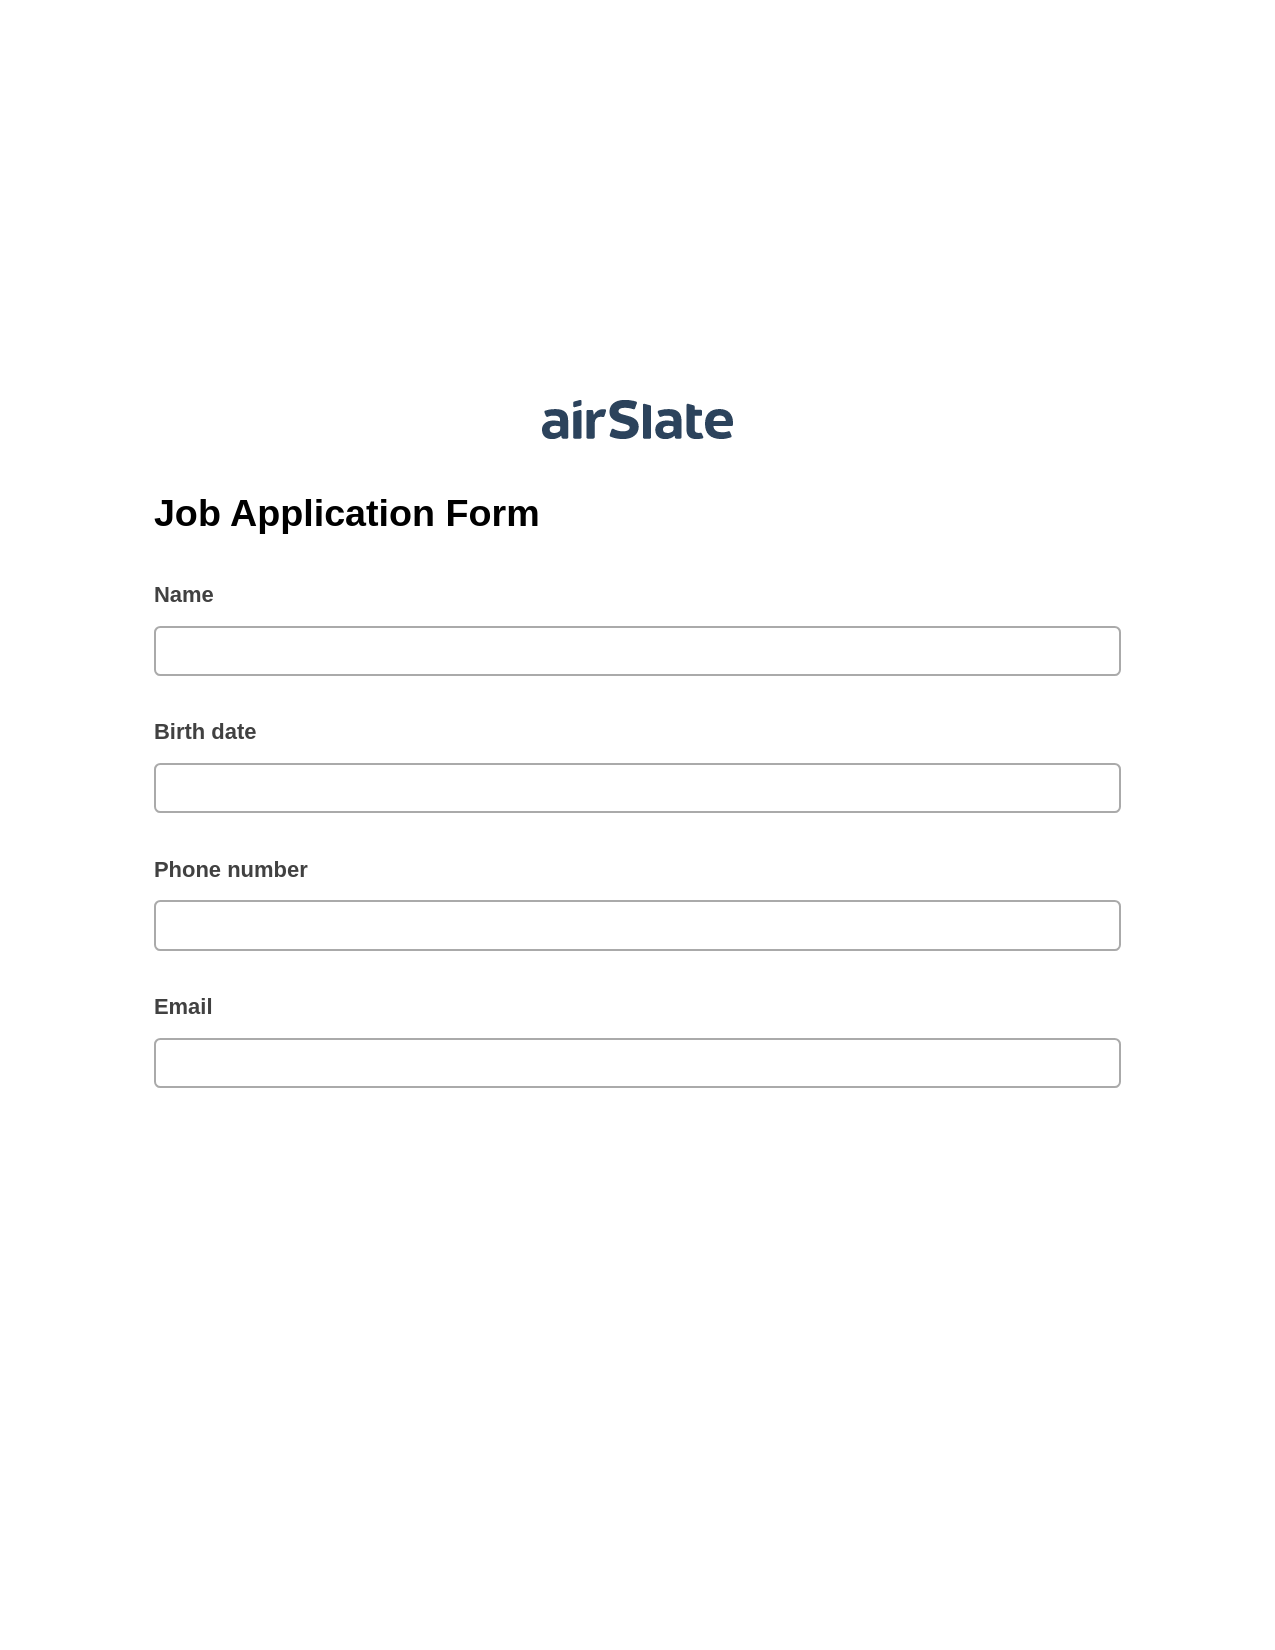 Multirole Job Application Form Pre-fill from Excel Spreadsheet Bot, Create MS Dynamics 365 Records Bot, Export to Salesforce Bot